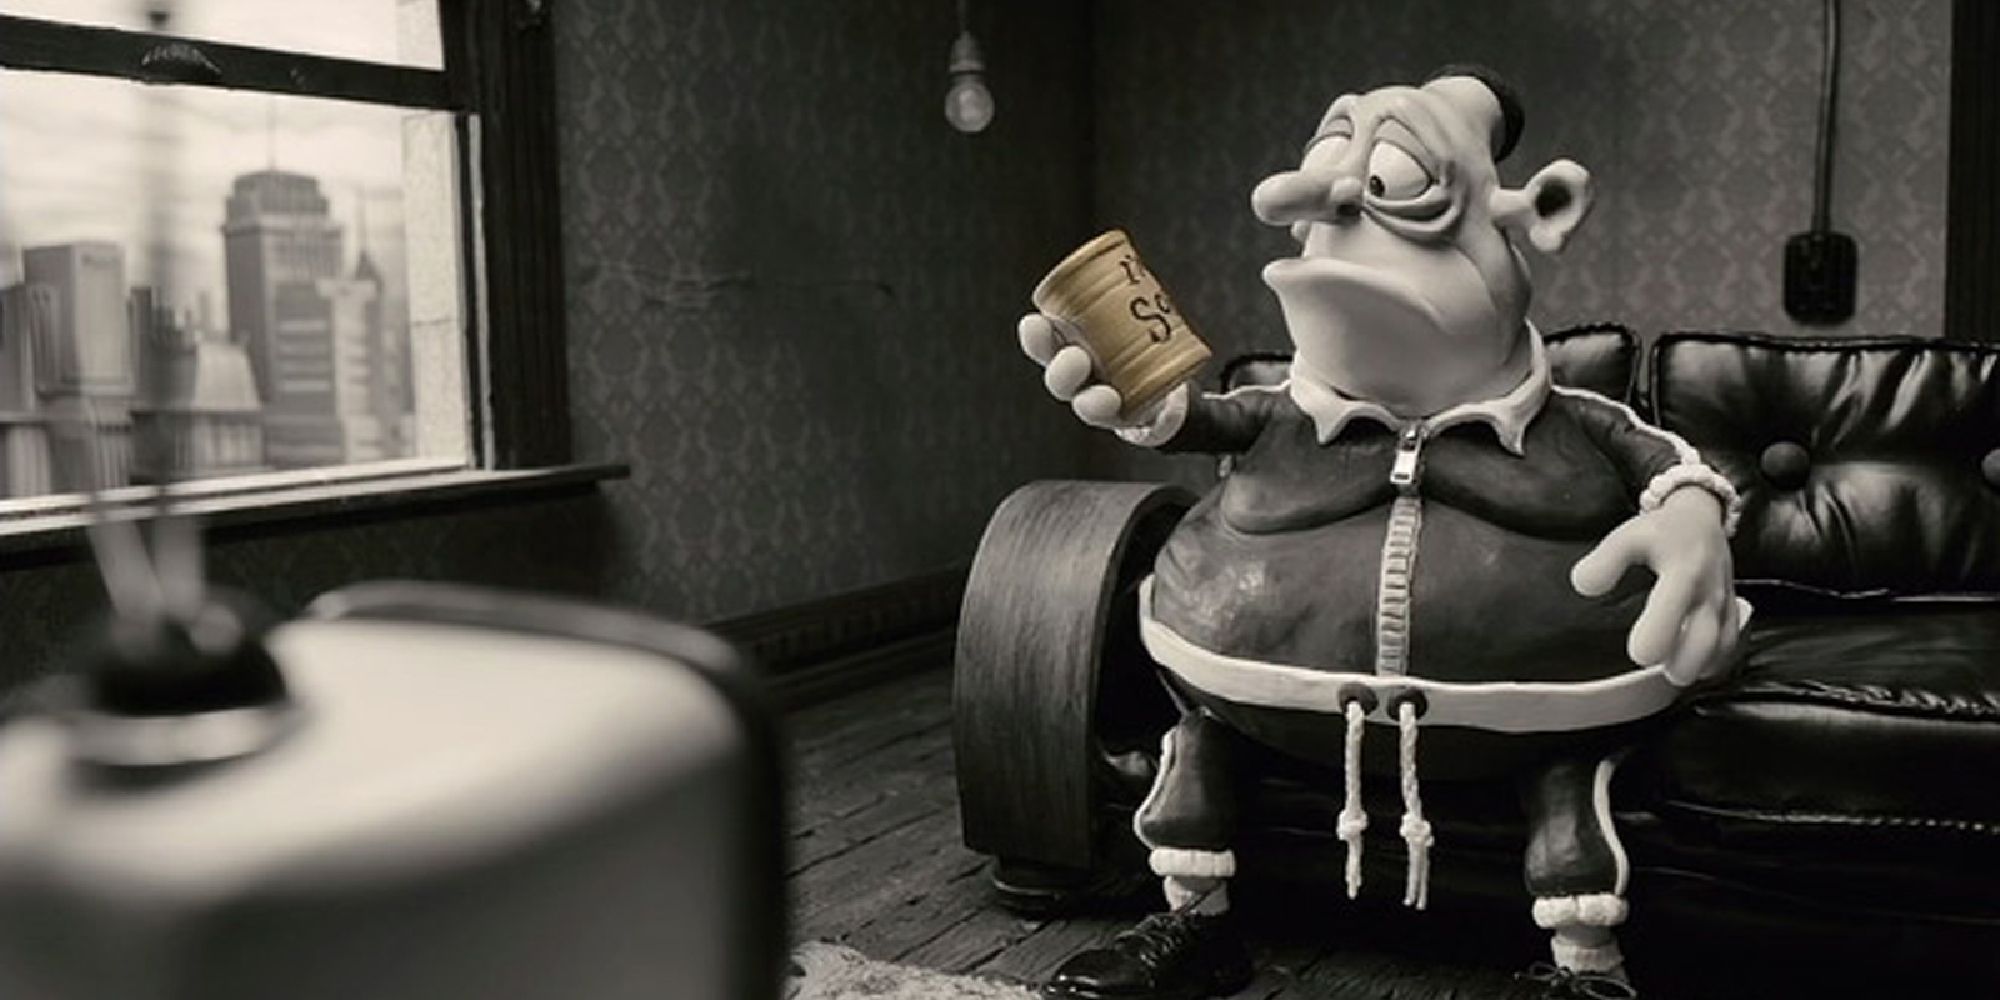 A man looking at a can while sitting on a couch in Mary and Max - 2009